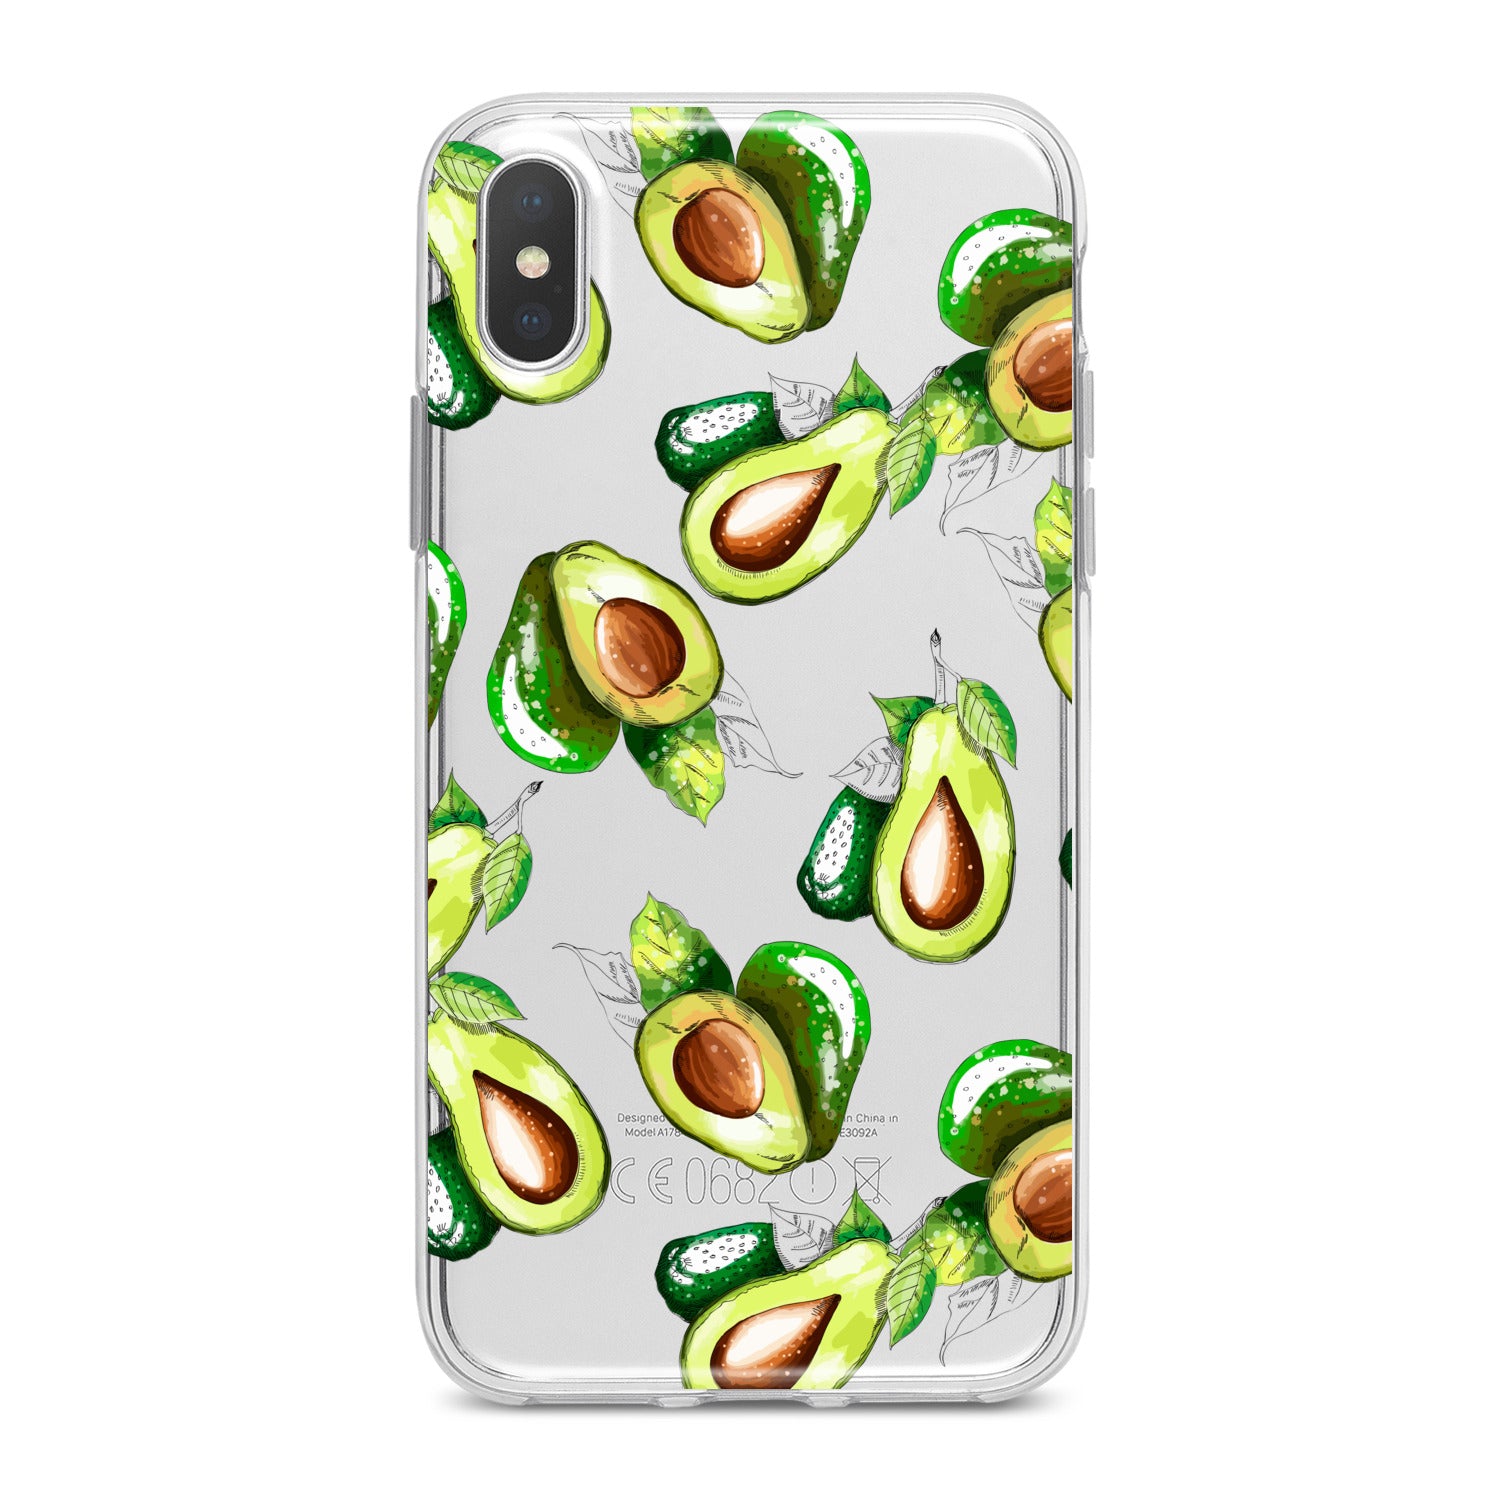 Lex Altern Bright Avocado Pattern Phone Case for your iPhone & Android phone.